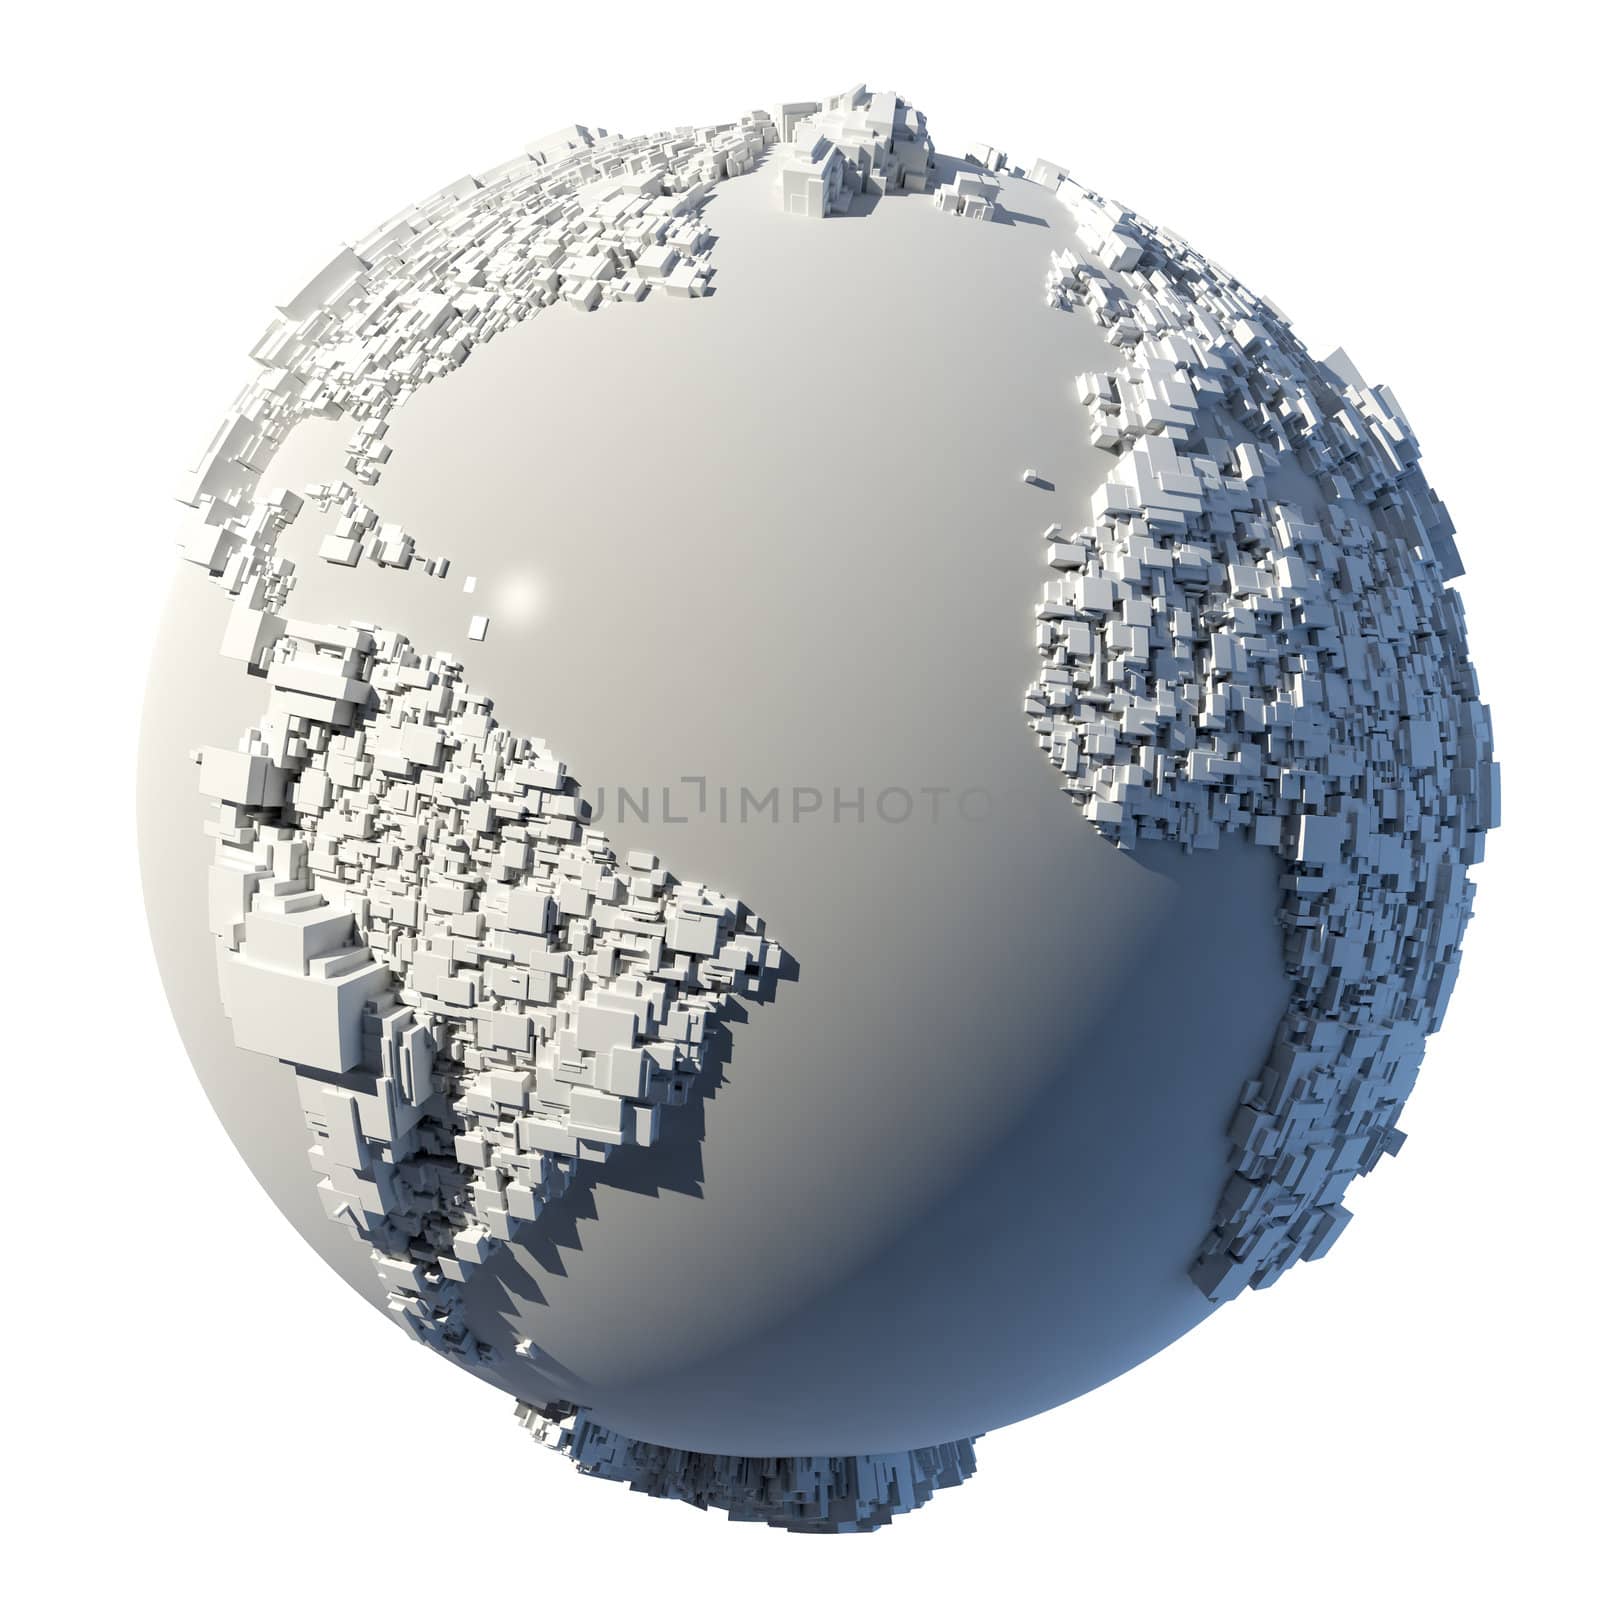 Cubic structure of the planet Earth by Antartis